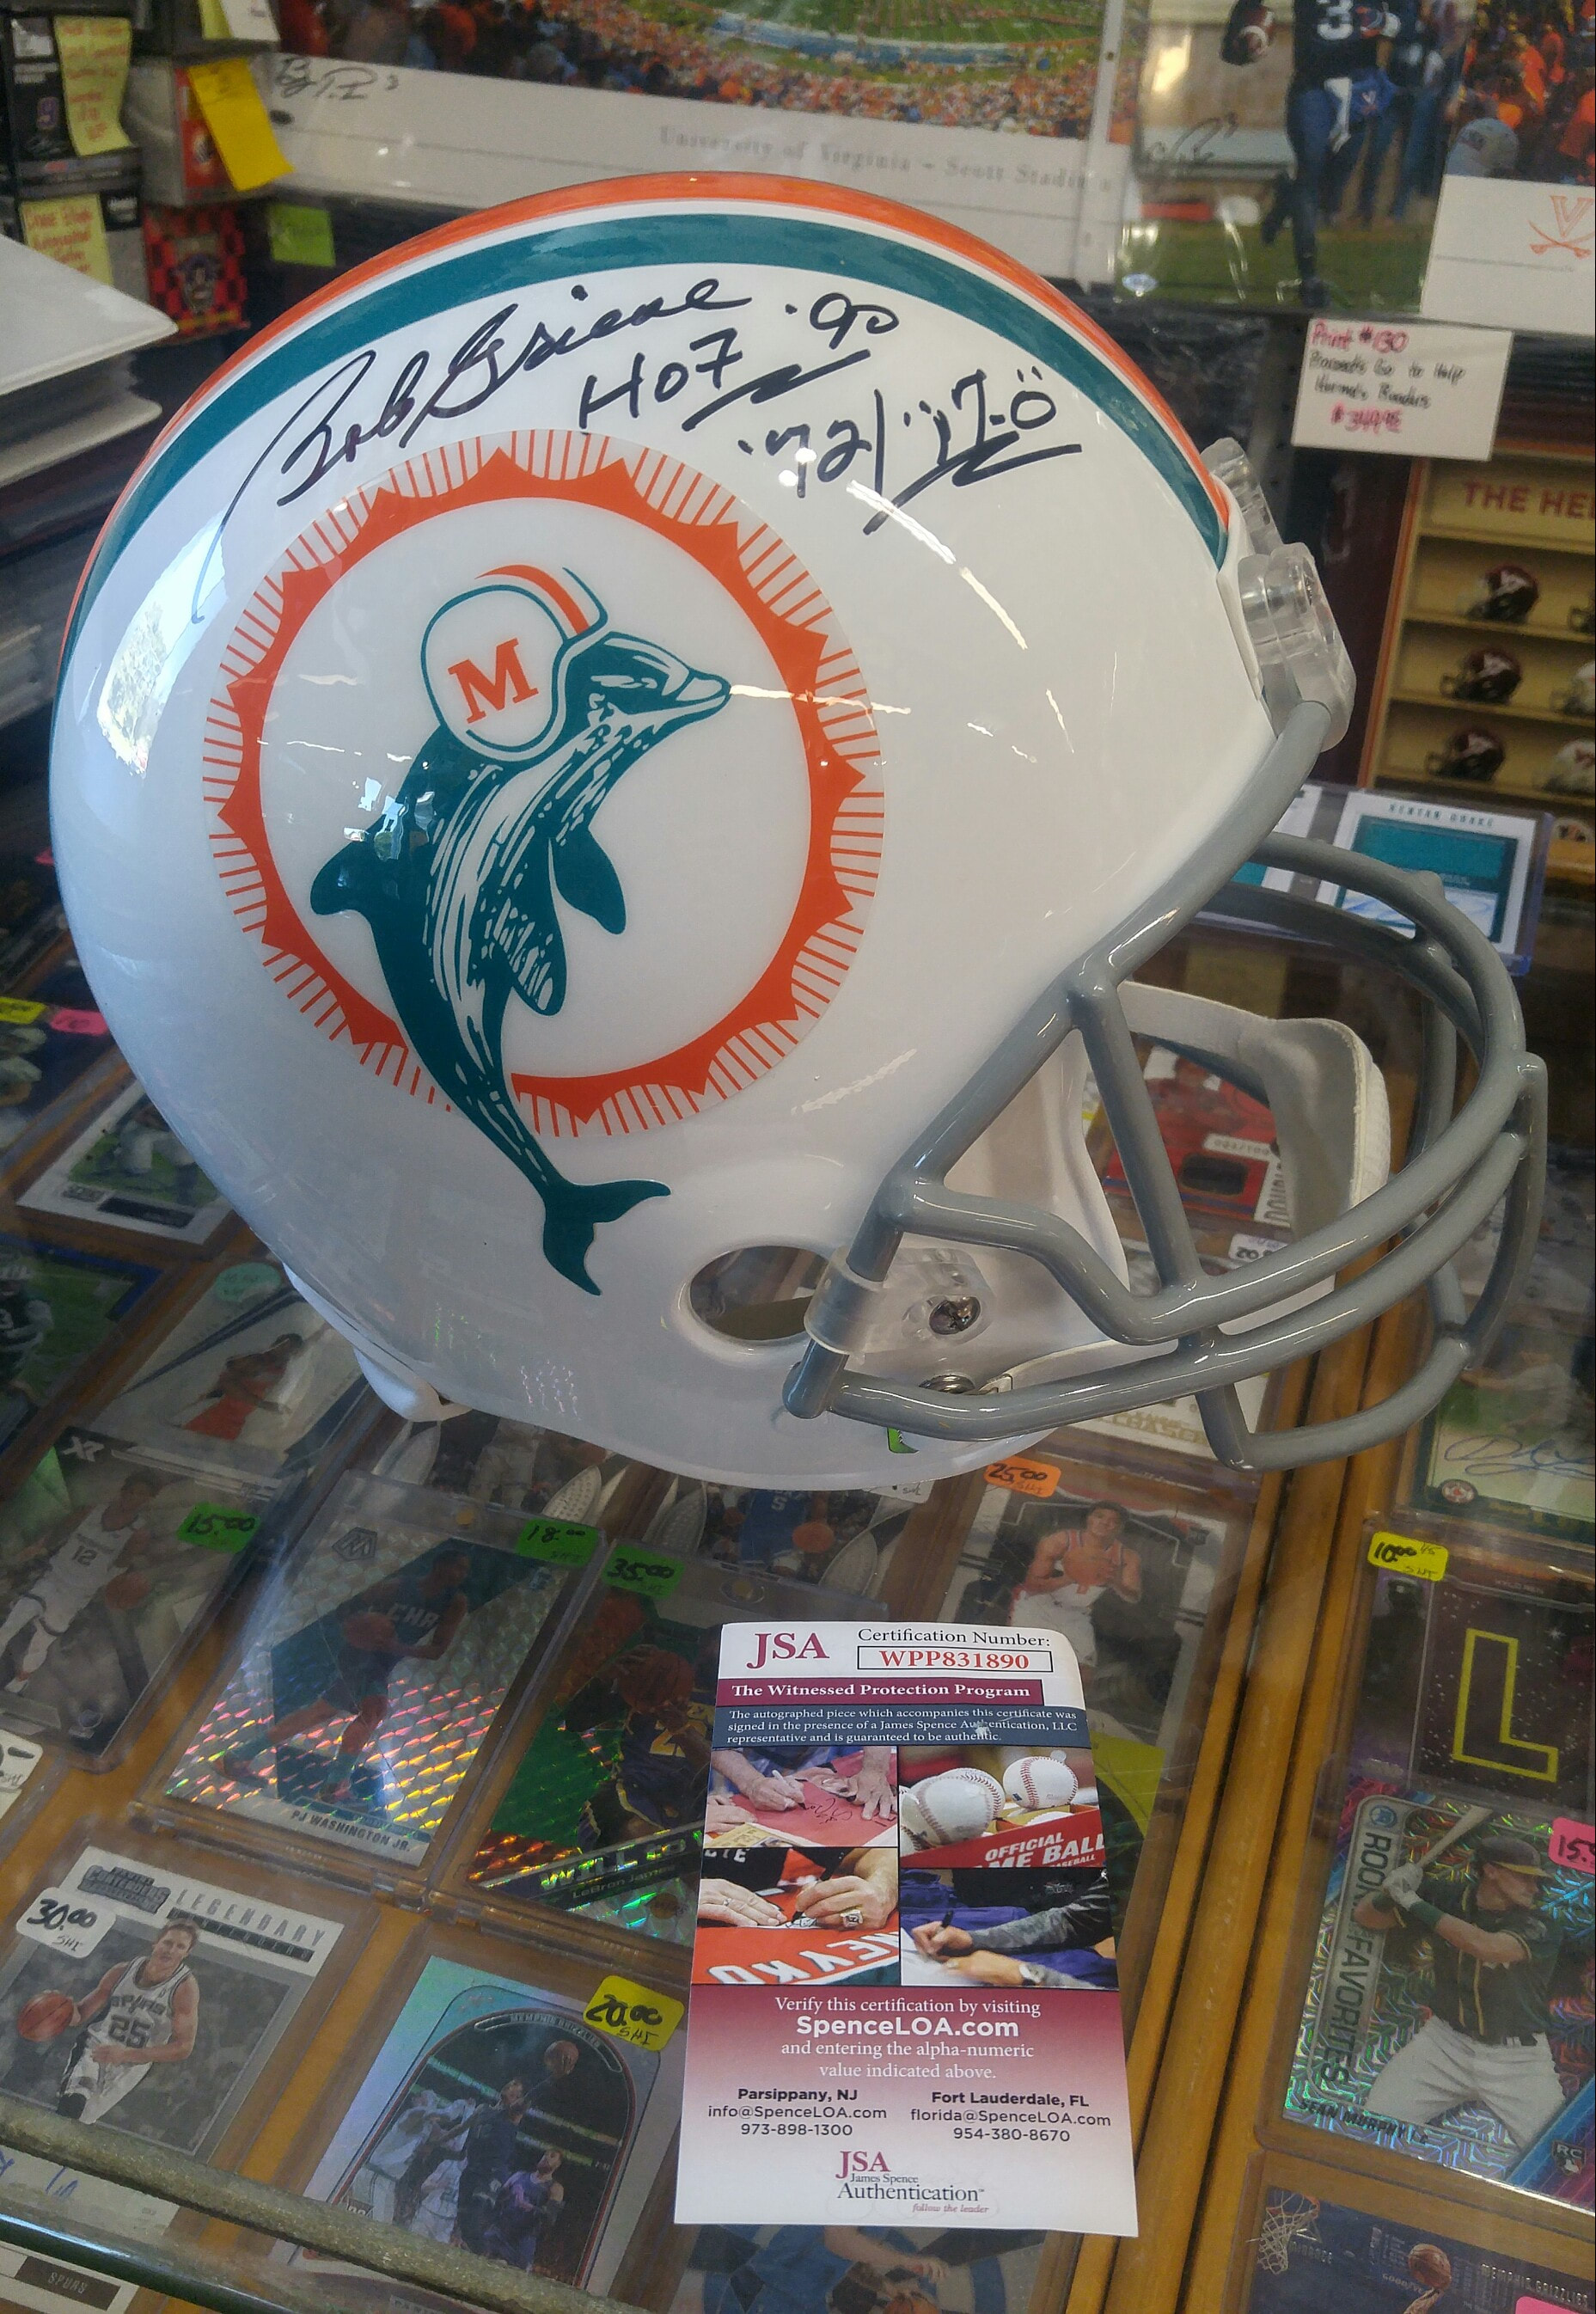 bob griese autographed football